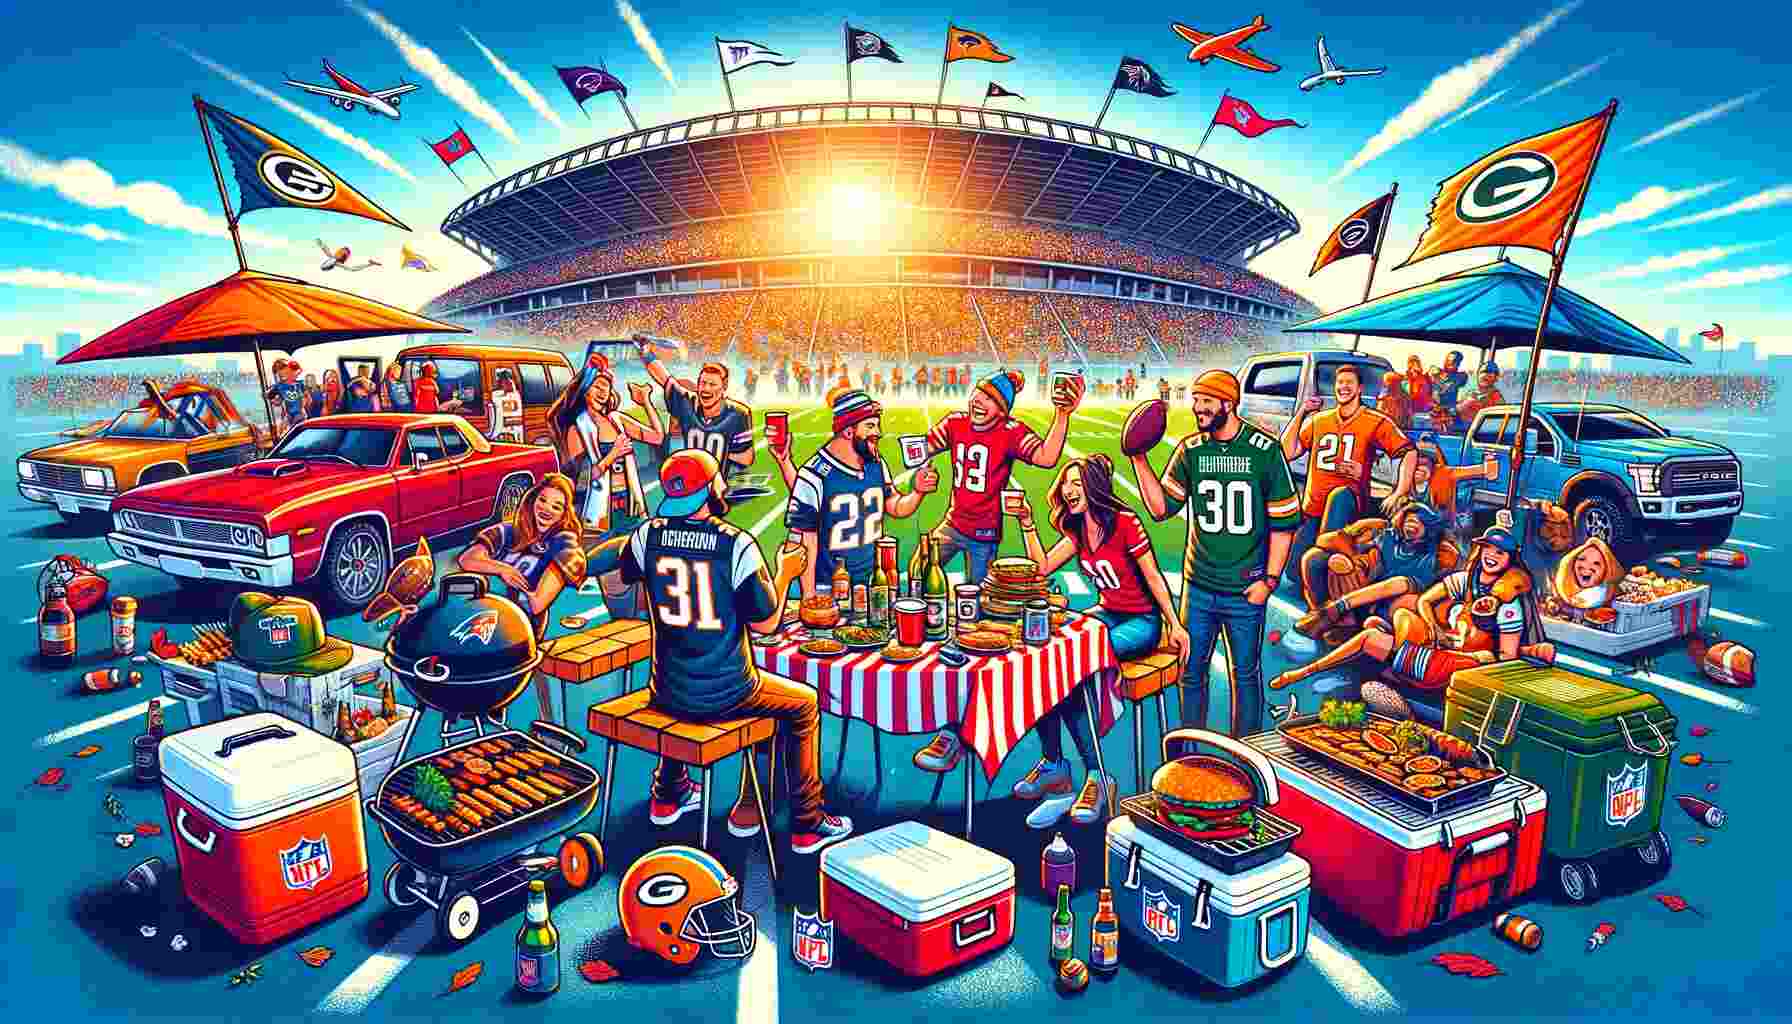 Here is the featured image for "Tailgate Like a Pro: The Ultimate Guide to NFL-Themed Outdoor Gear," capturing the spirit of an NFL tailgate party with friends, NFL-themed gear, and a festive atmosphere.